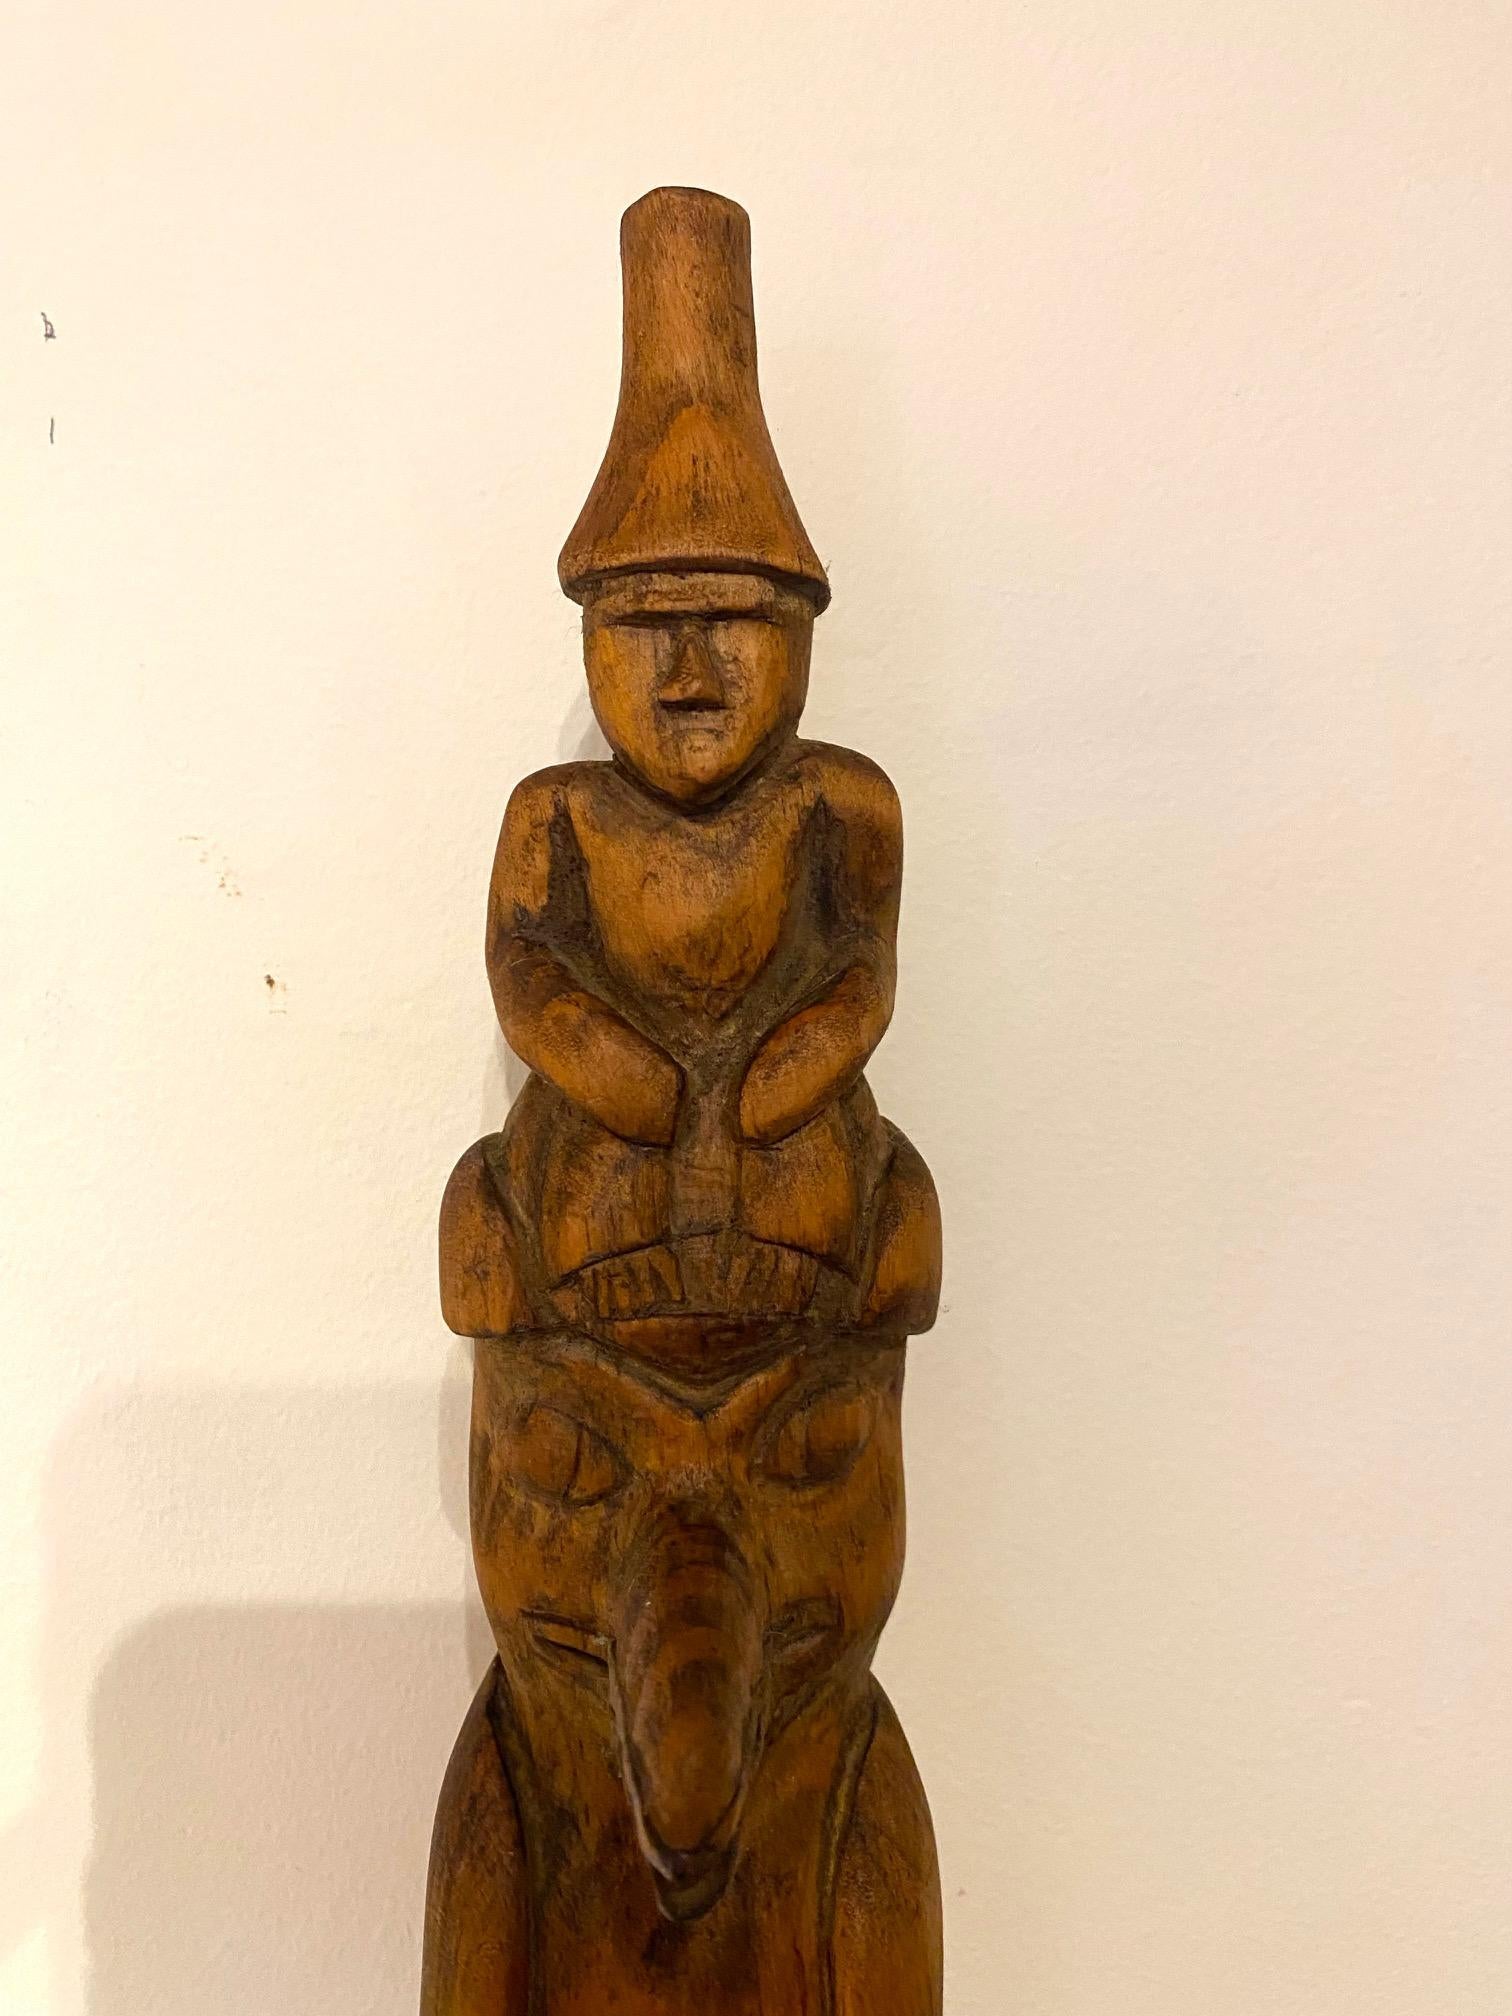 Antique Pacific Northwest Coast carved cedar Totem Pole, circa 1920s, a hand carved cedar pole featuring a man in conical hat (